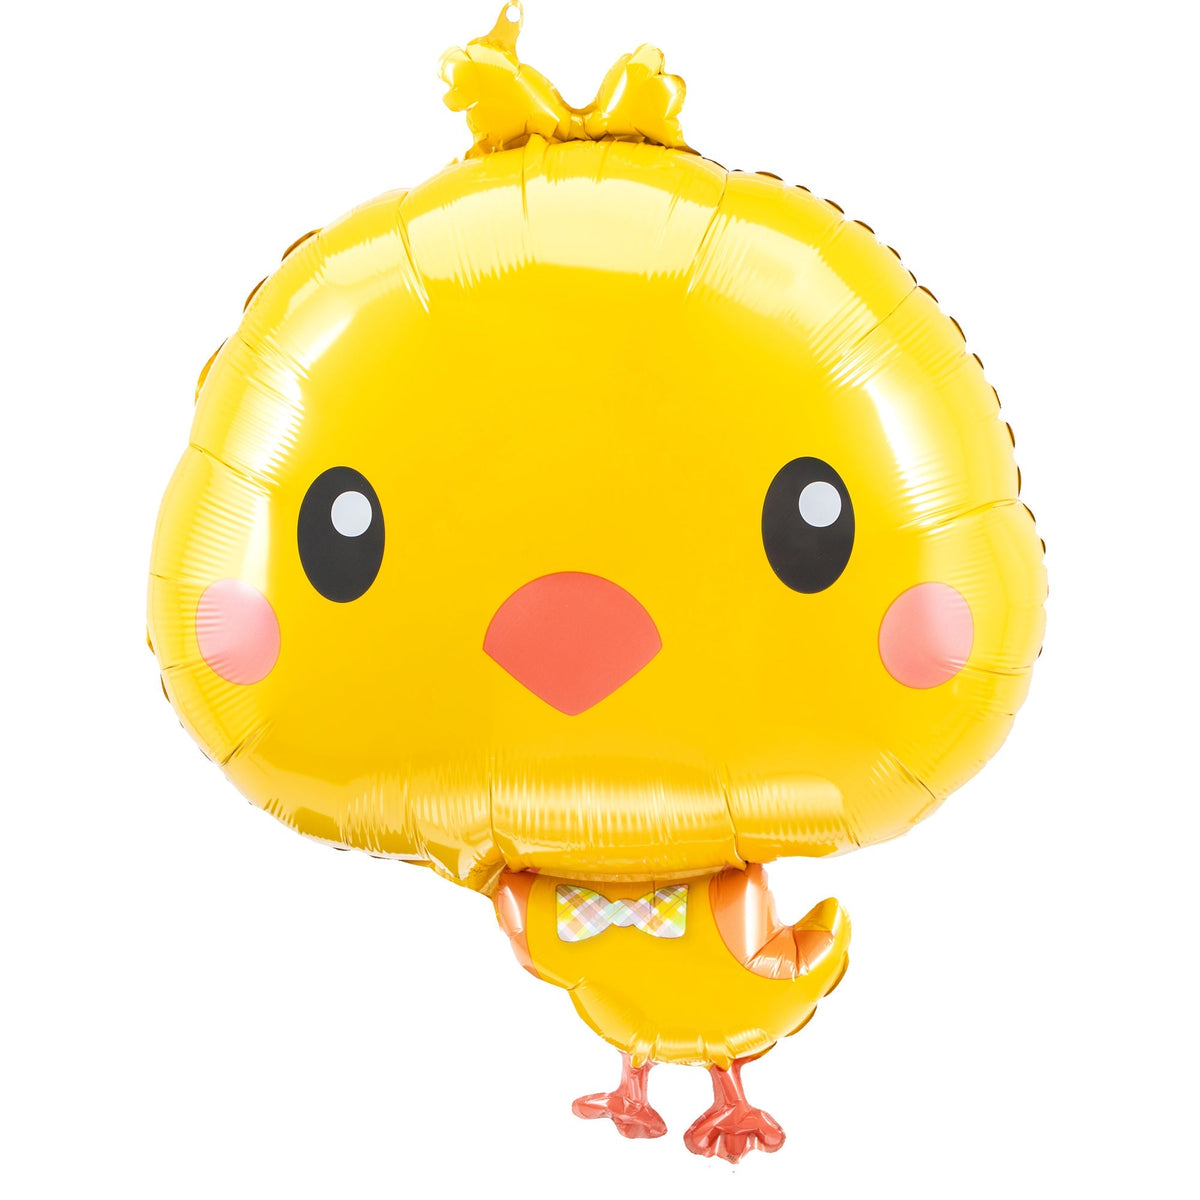 LE GROUPE BLC INTL INC Balloons Easter Chicky Supershape Foil Balloon, 28 Inches, 1 Count